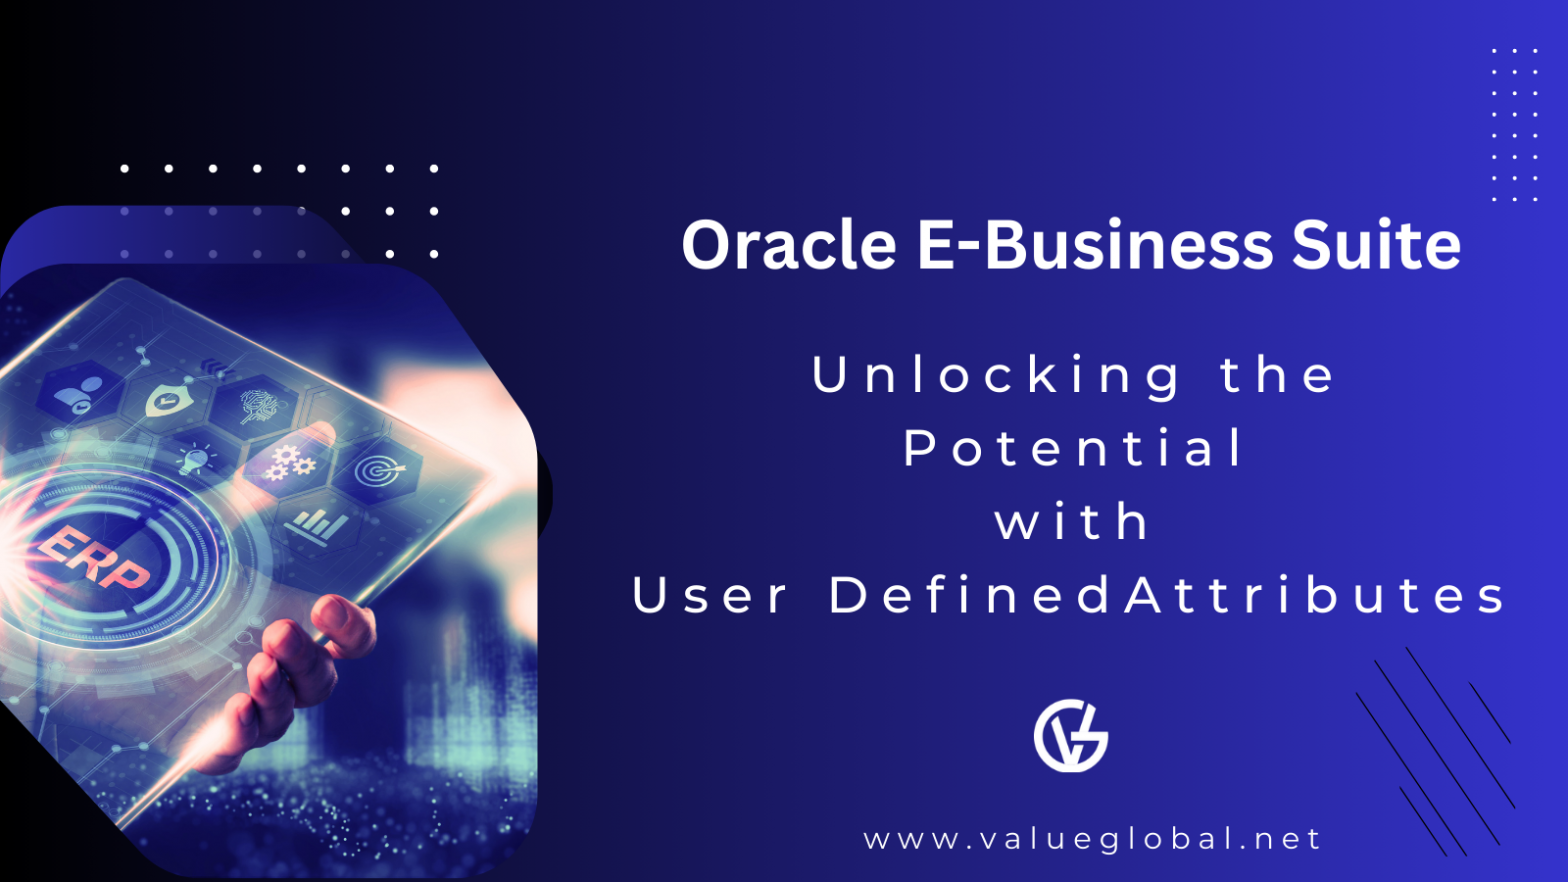 Oracle E-Business Suite: Unlocking the Potential with User Defined Attributes